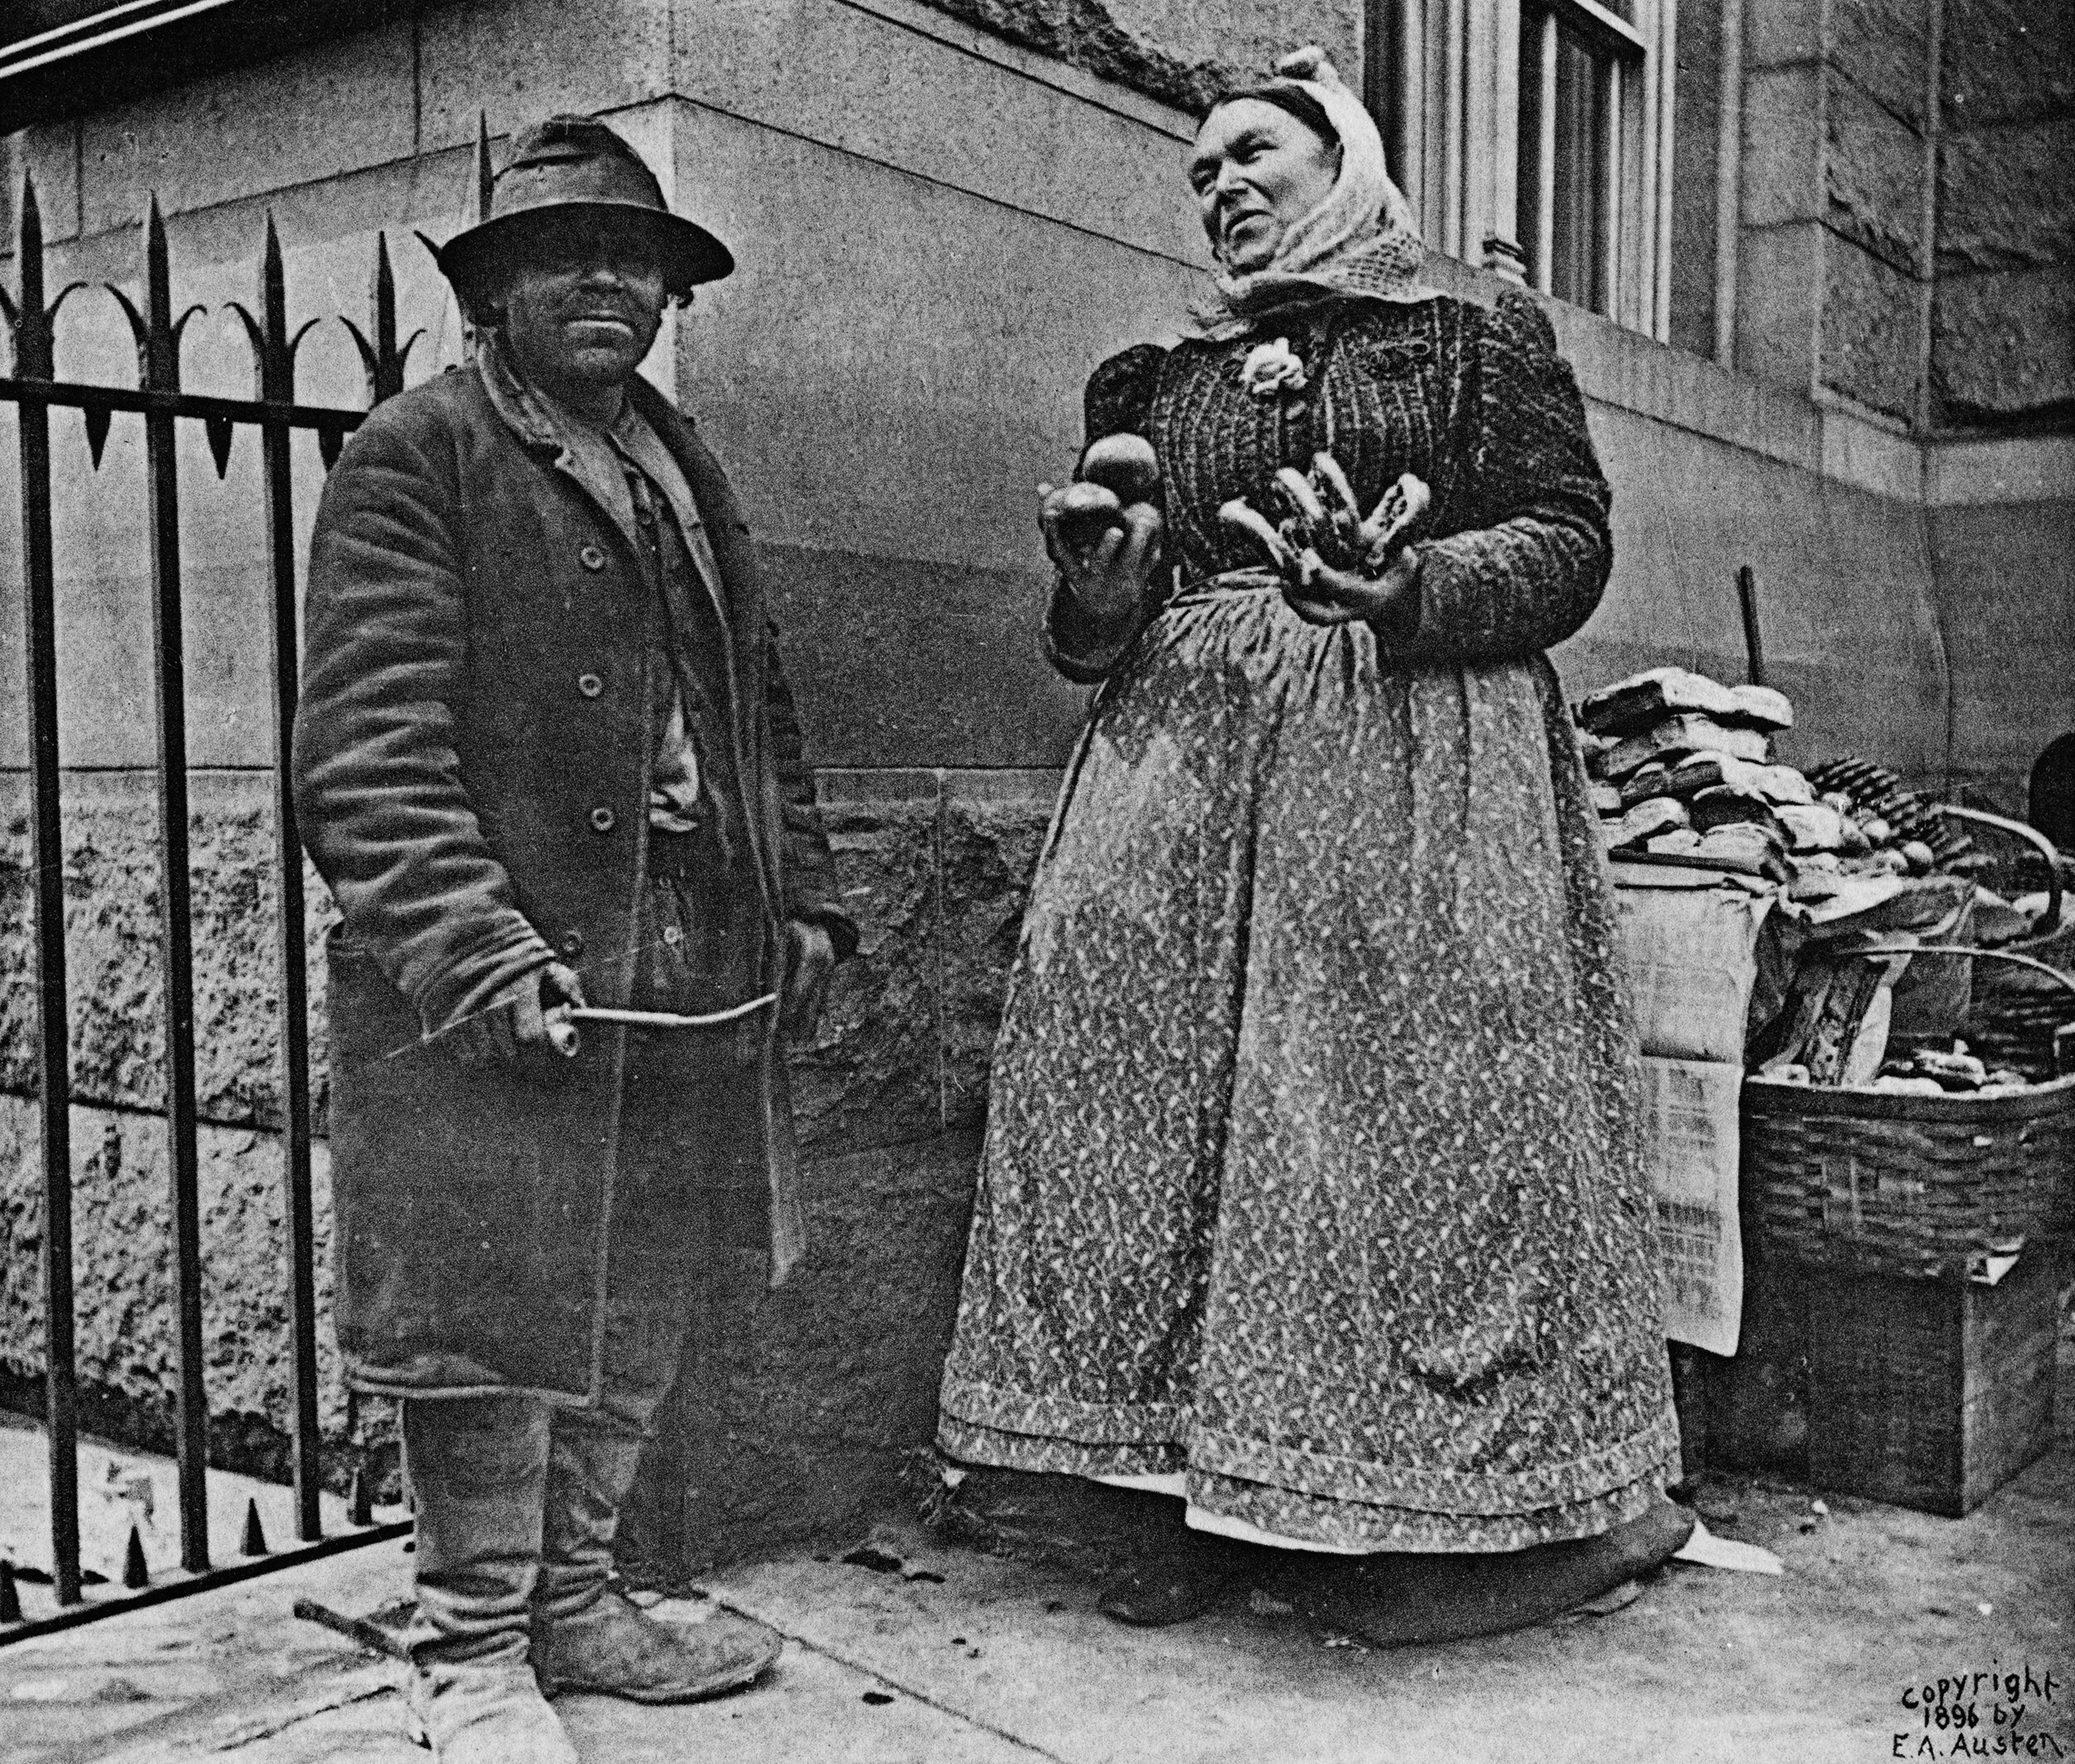   Pretzel Vendor and Emigrant, South Ferry  Collection of Historic Richmond Town, 50.015.2206 